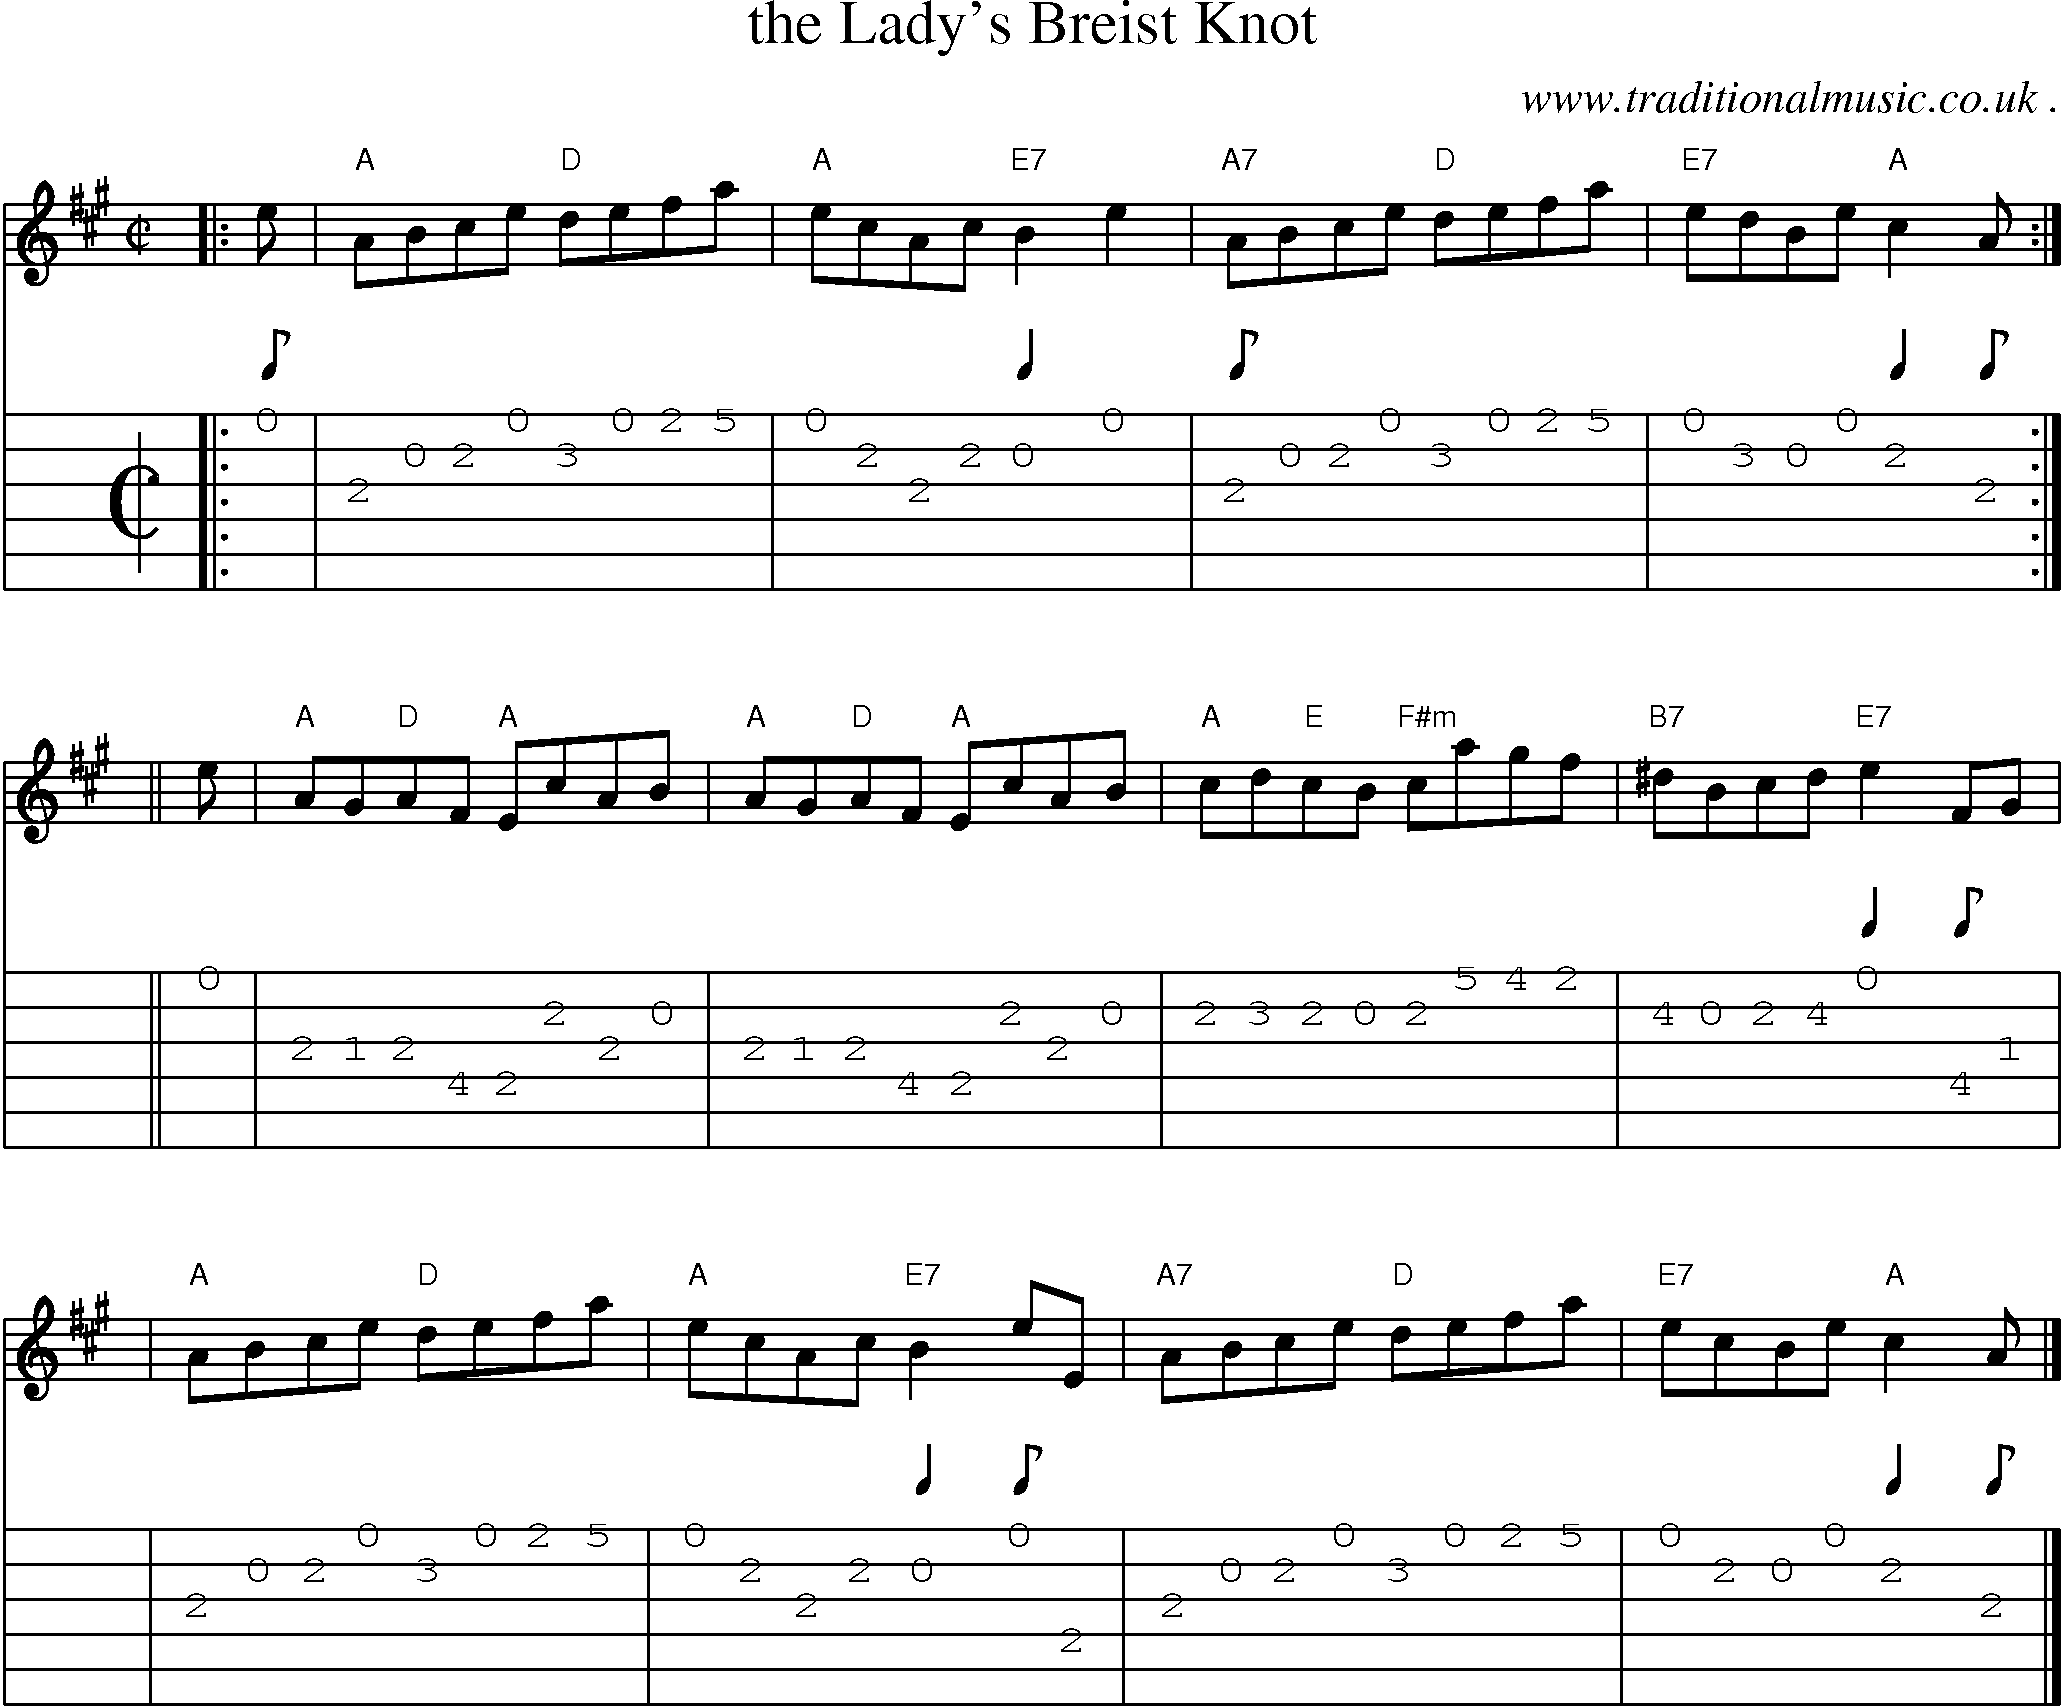 Sheet-music  score, Chords and Guitar Tabs for The Ladys Breist Knot